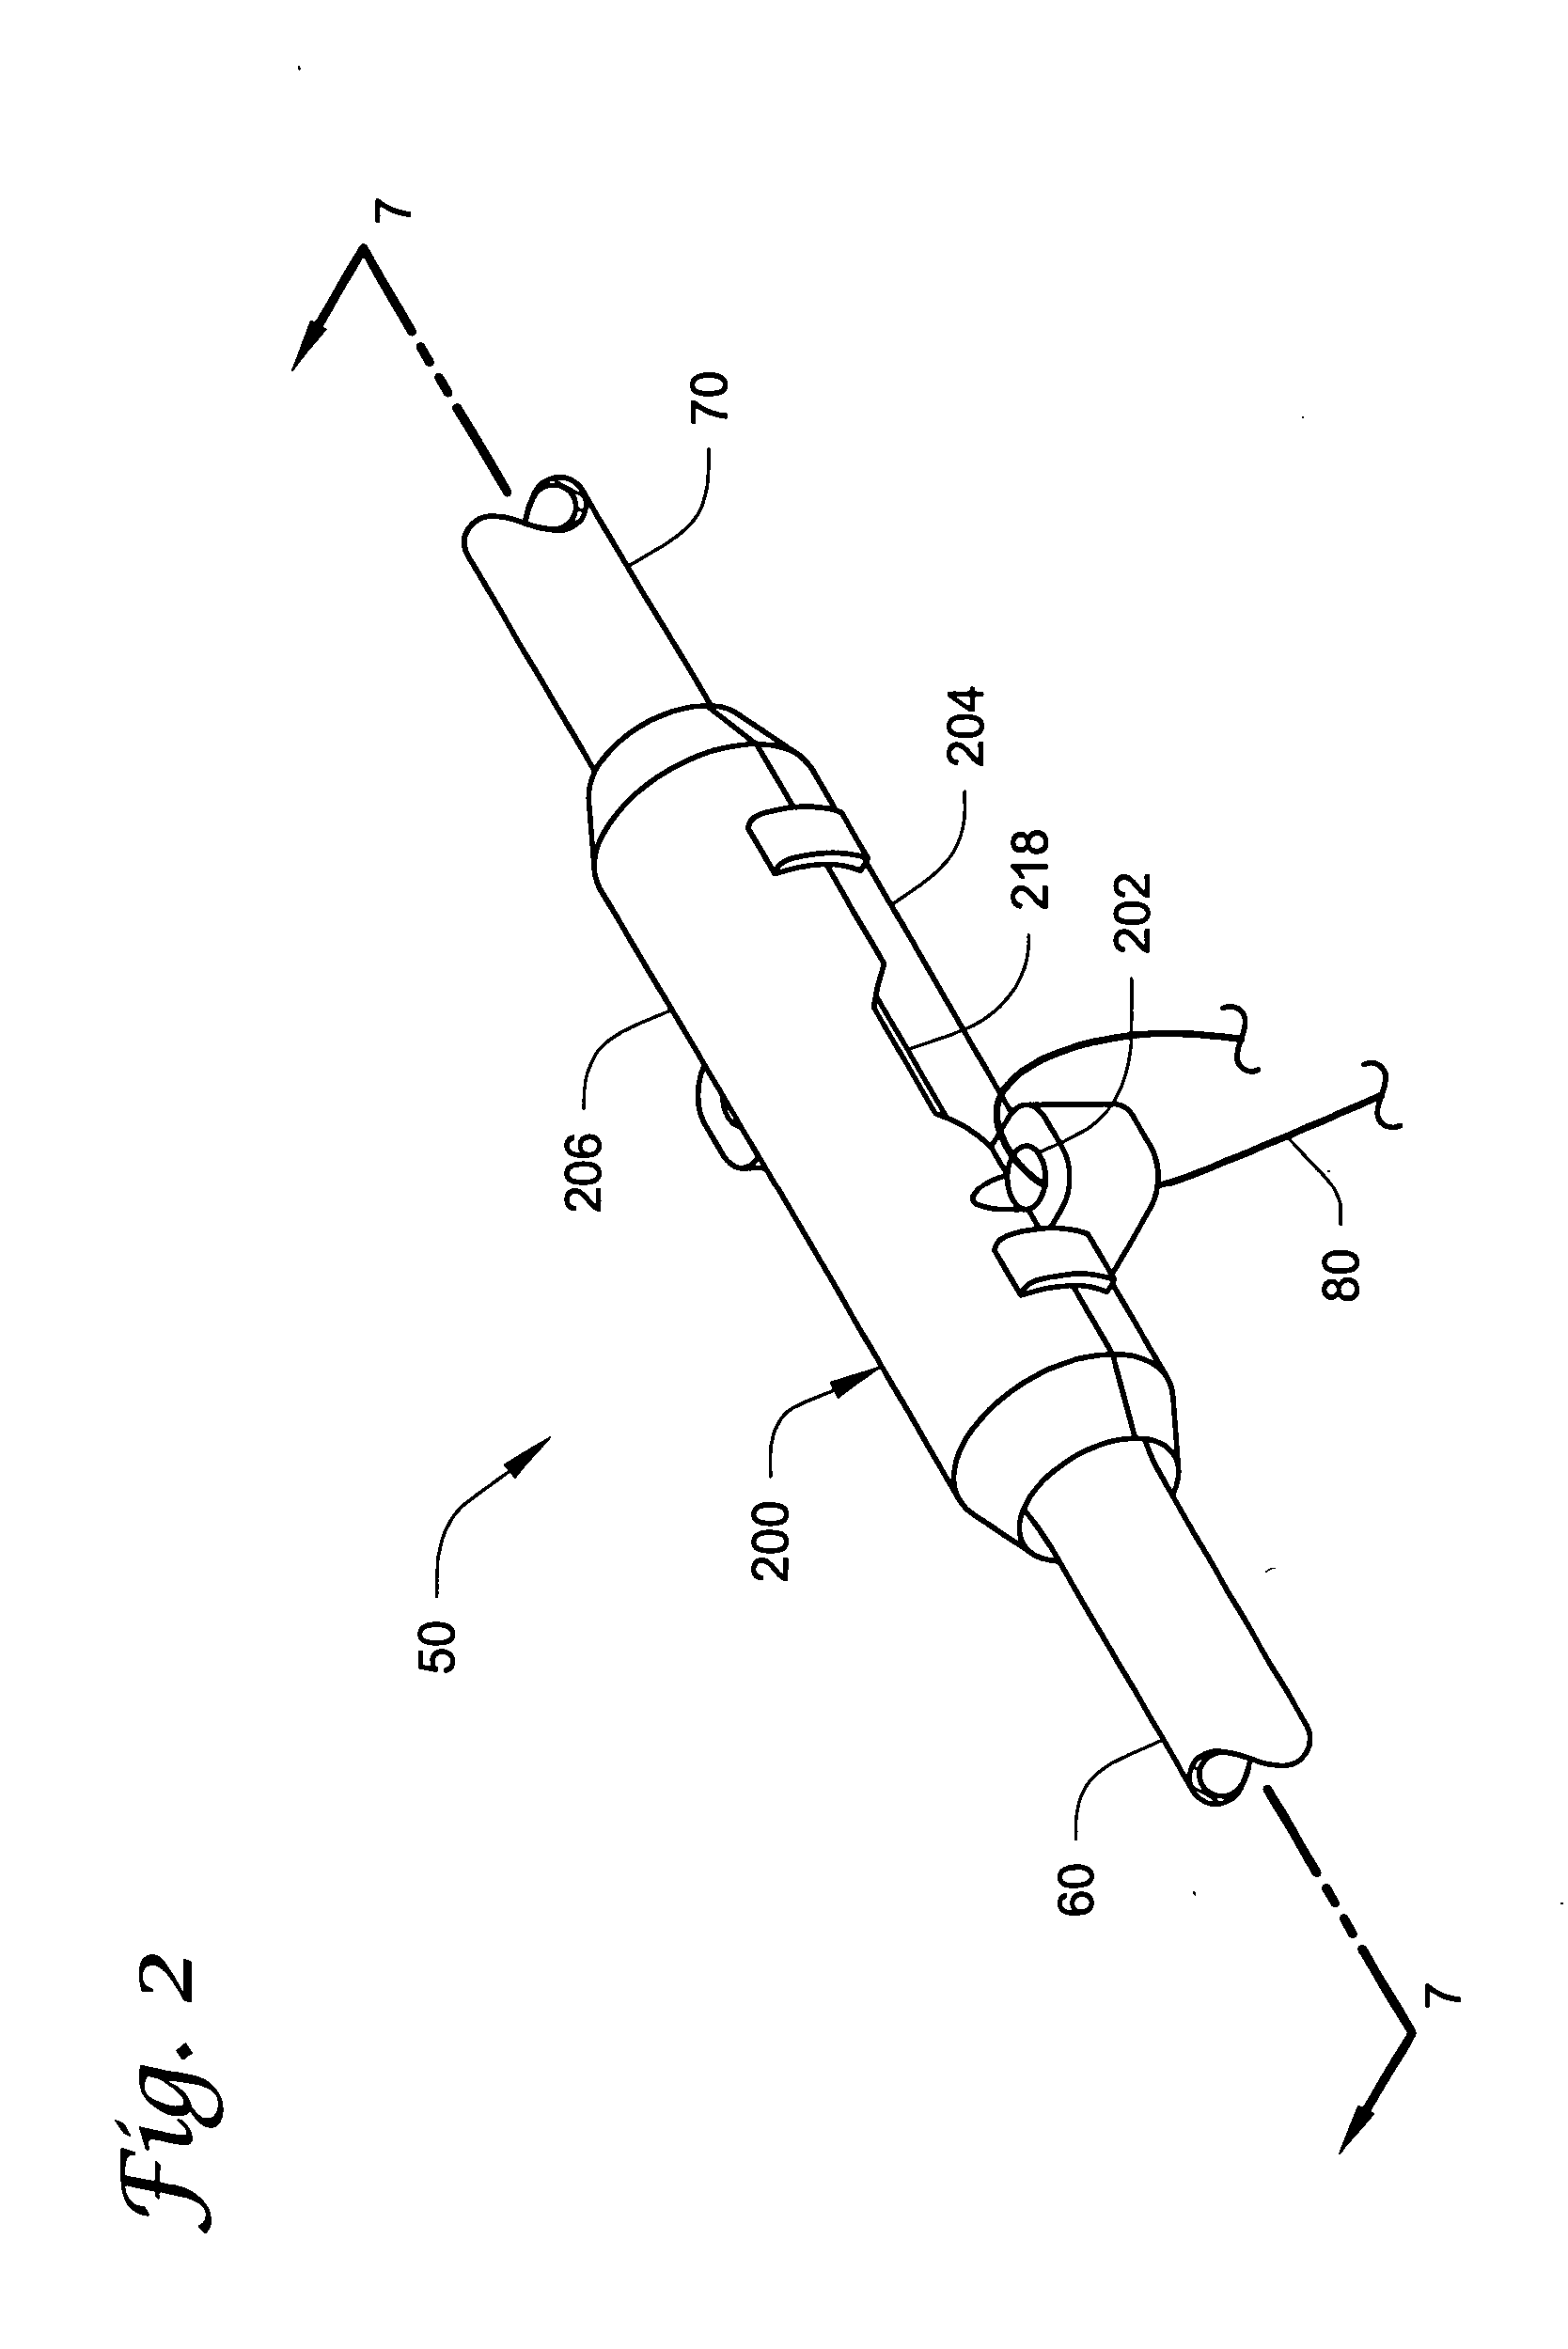 Strain relief device and connector assemblies incorporating same